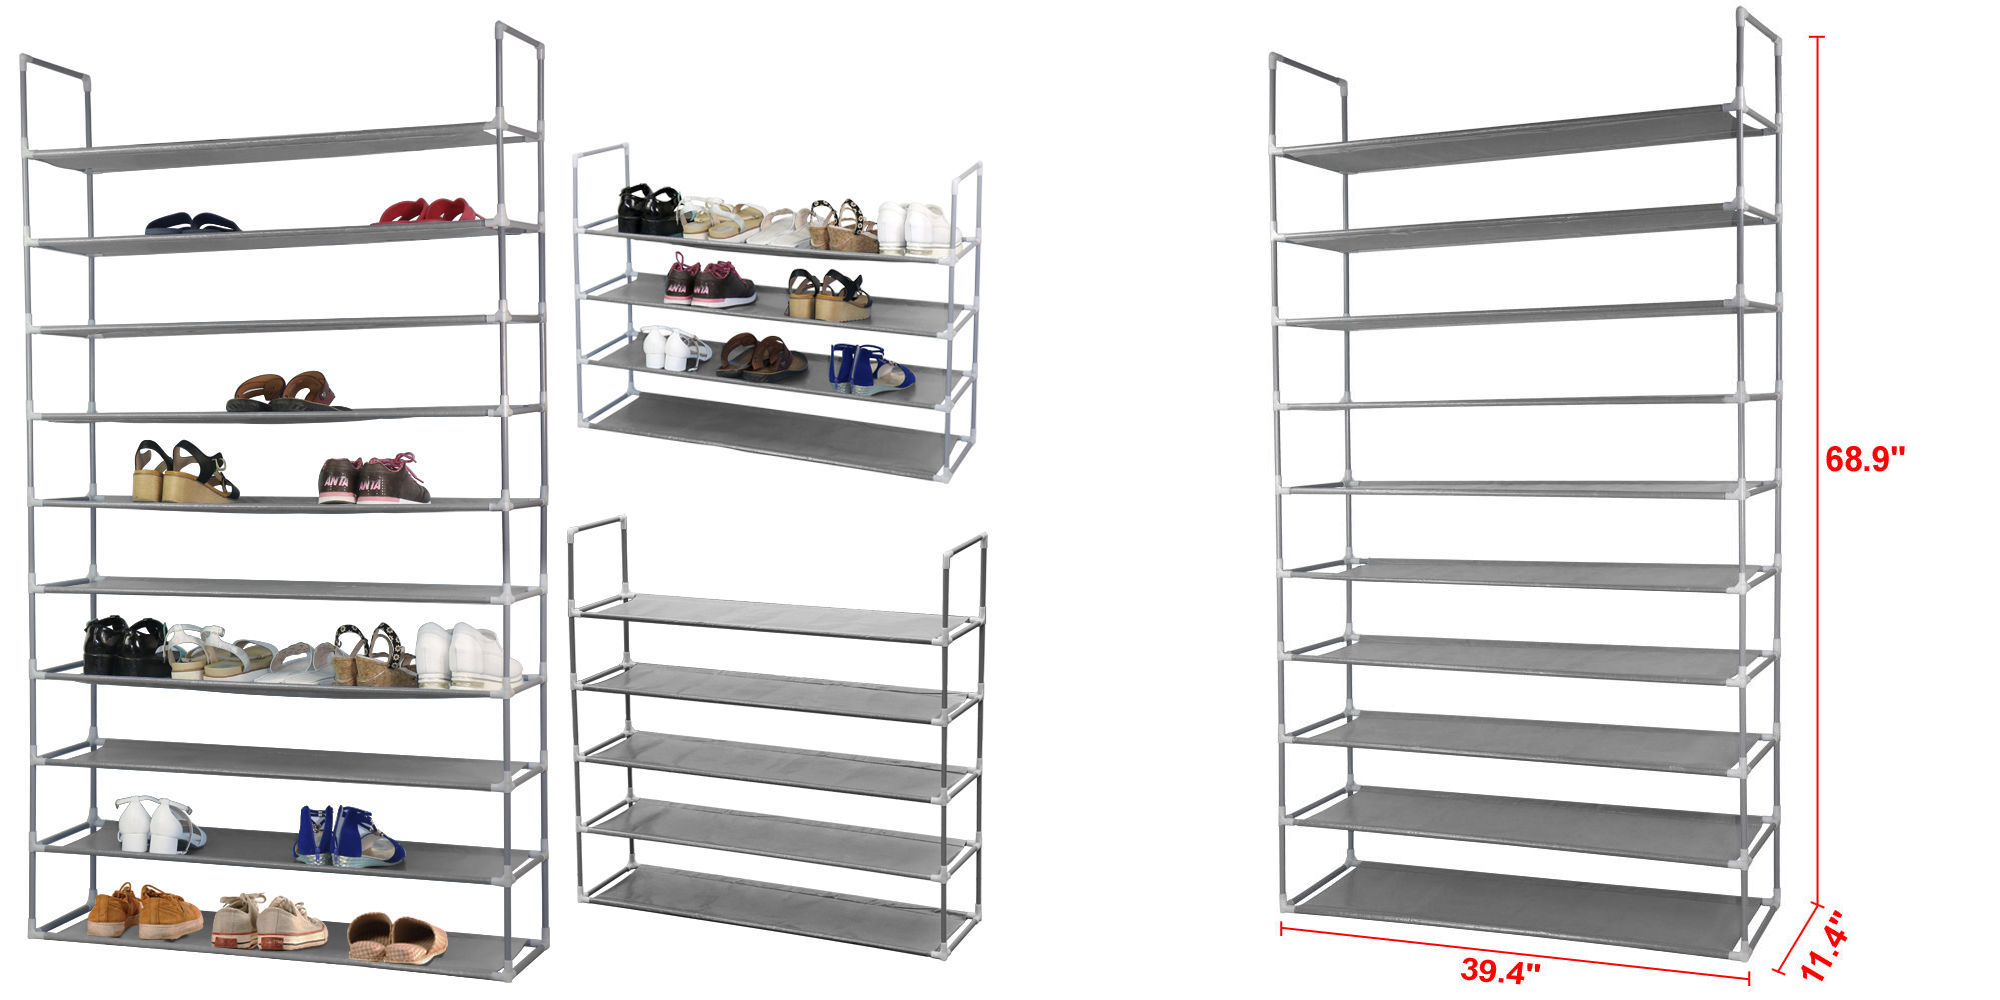 10-Tier Shoe Rack Only $17.99 SHIPPED! For MORE Than Just Shoes!